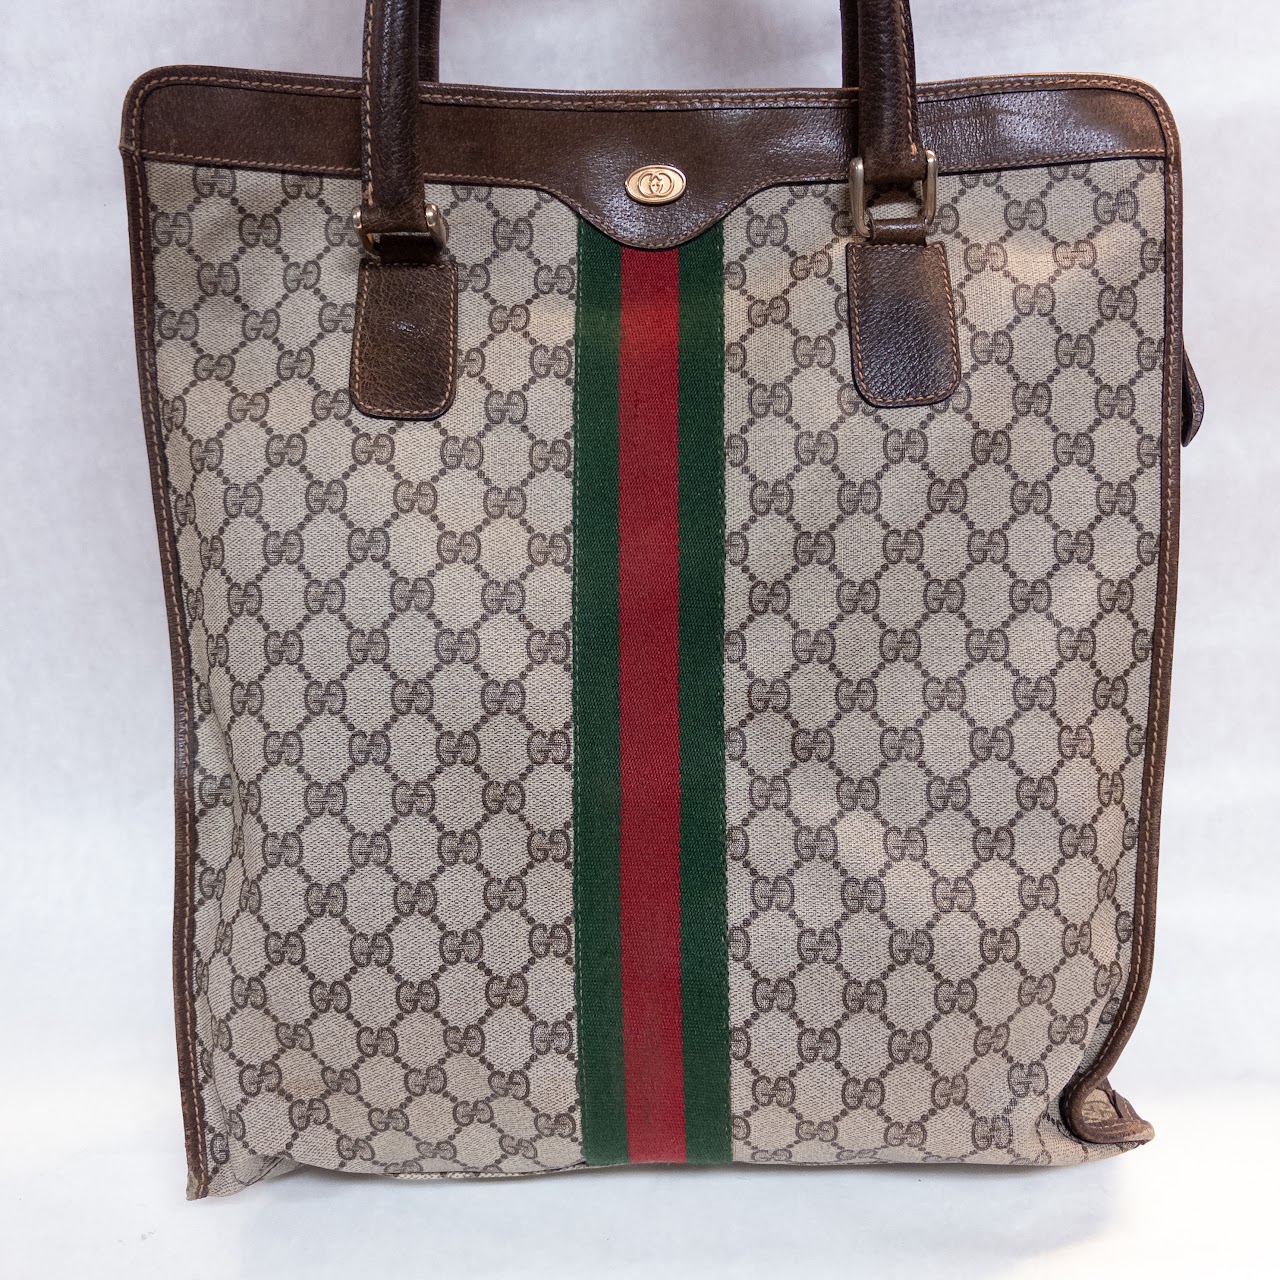 Gucci Ophidia GG Supreme Large Tote Bag